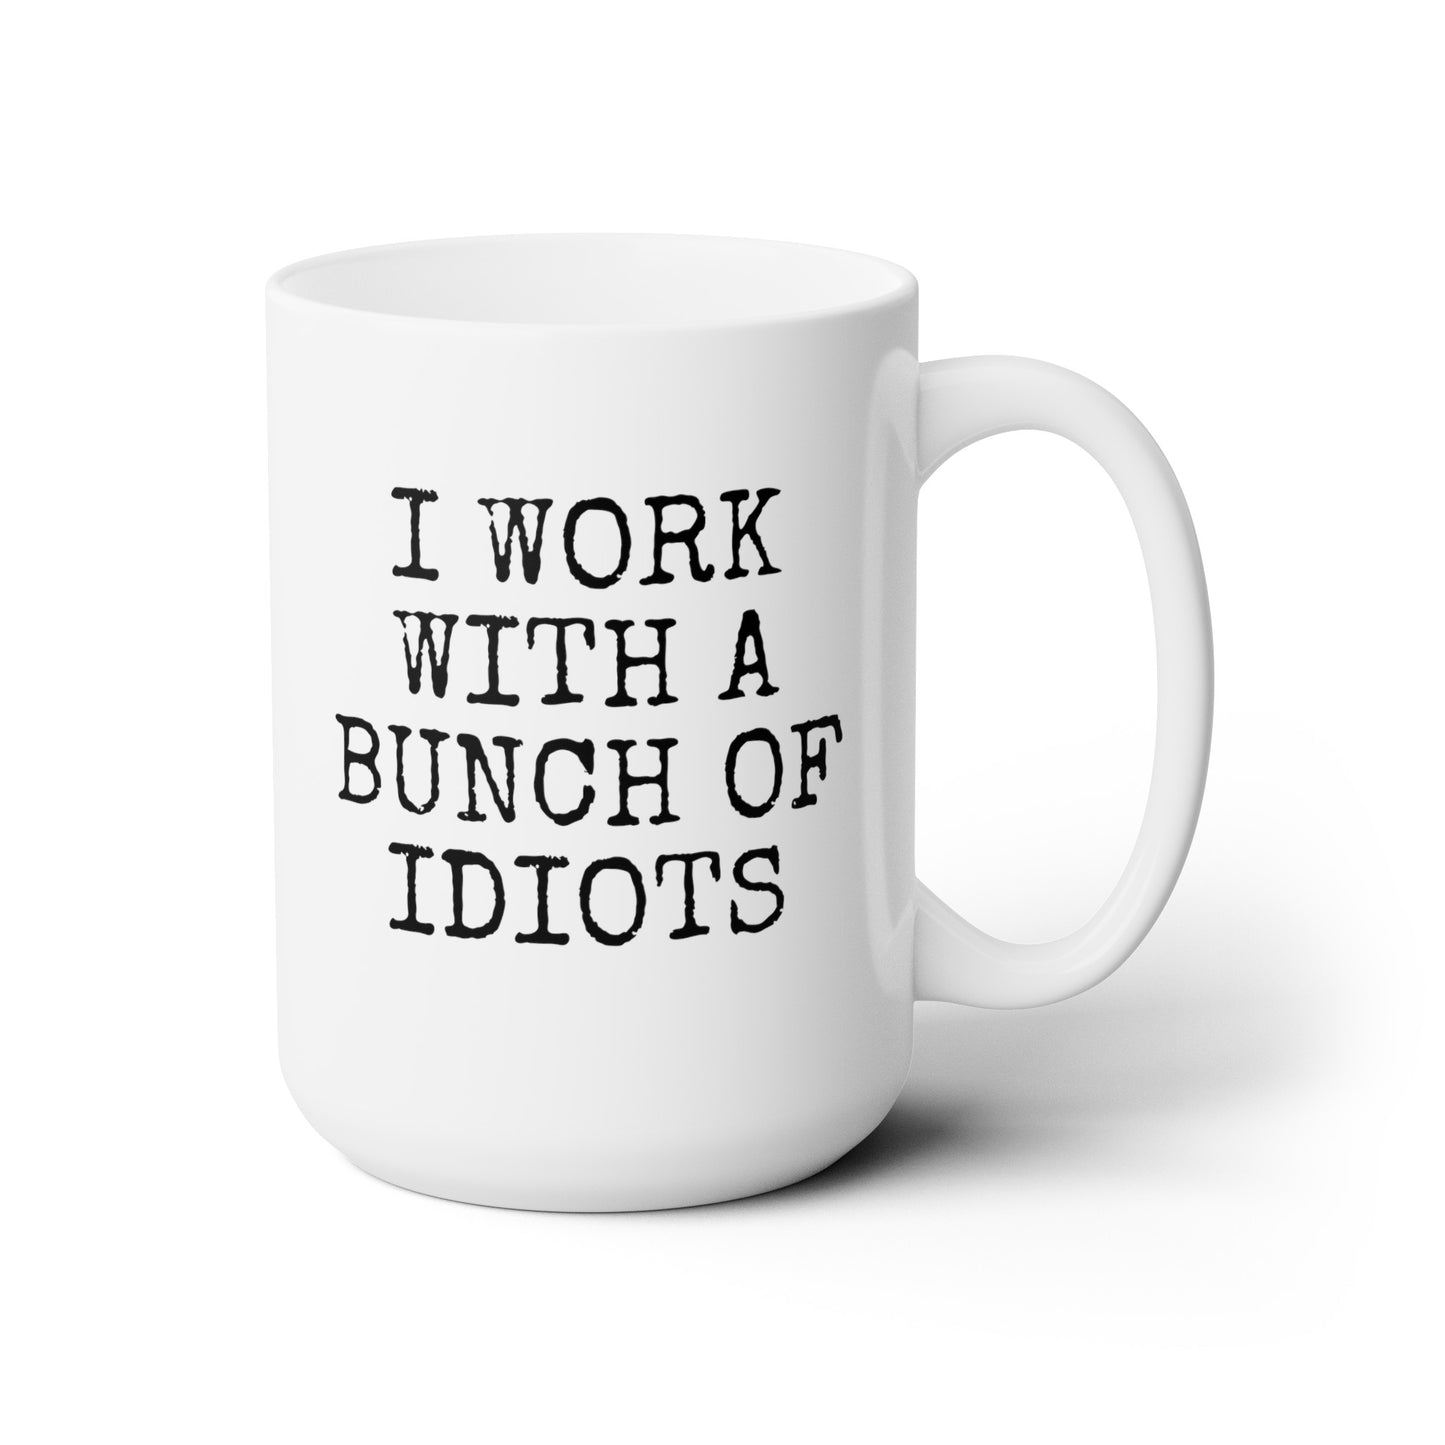 I Work With A Bunch Of Idiots 15oz white funny large coffee mug gift for coworker office humor novelty work joke christmas secret santa present waveywares wavey wares wavywares wavy wares